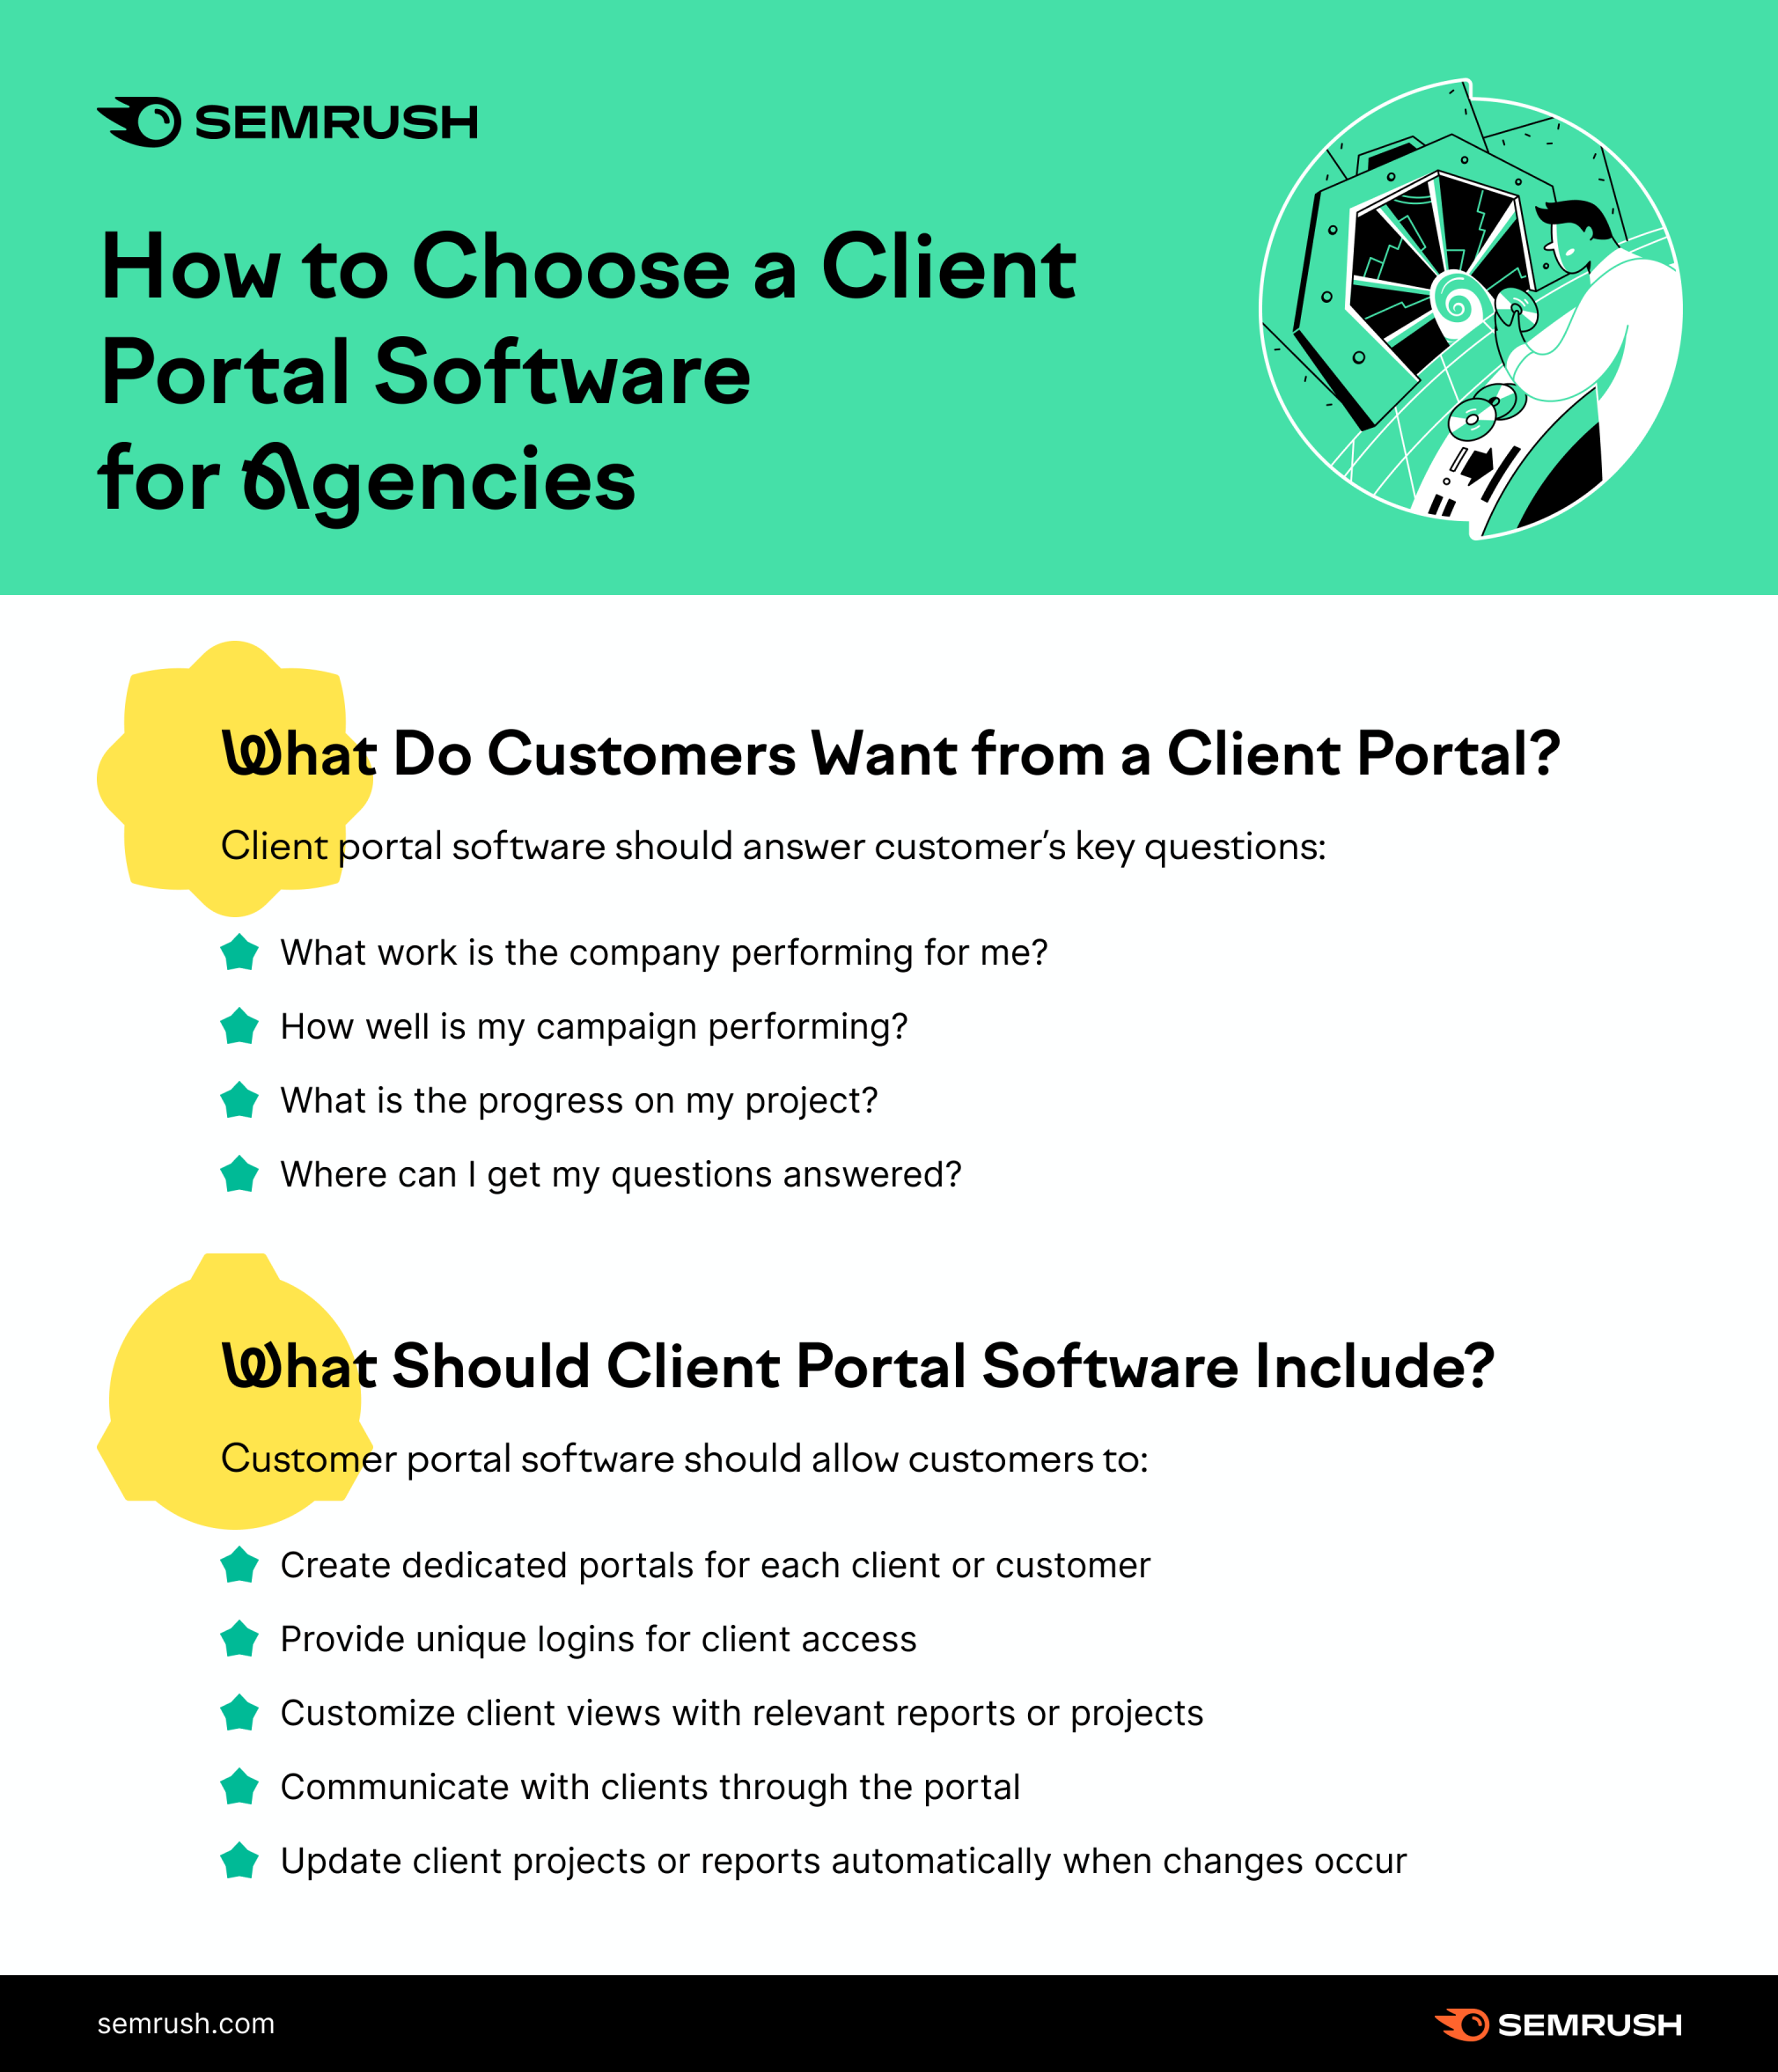 How to Choose Client Portal Software?